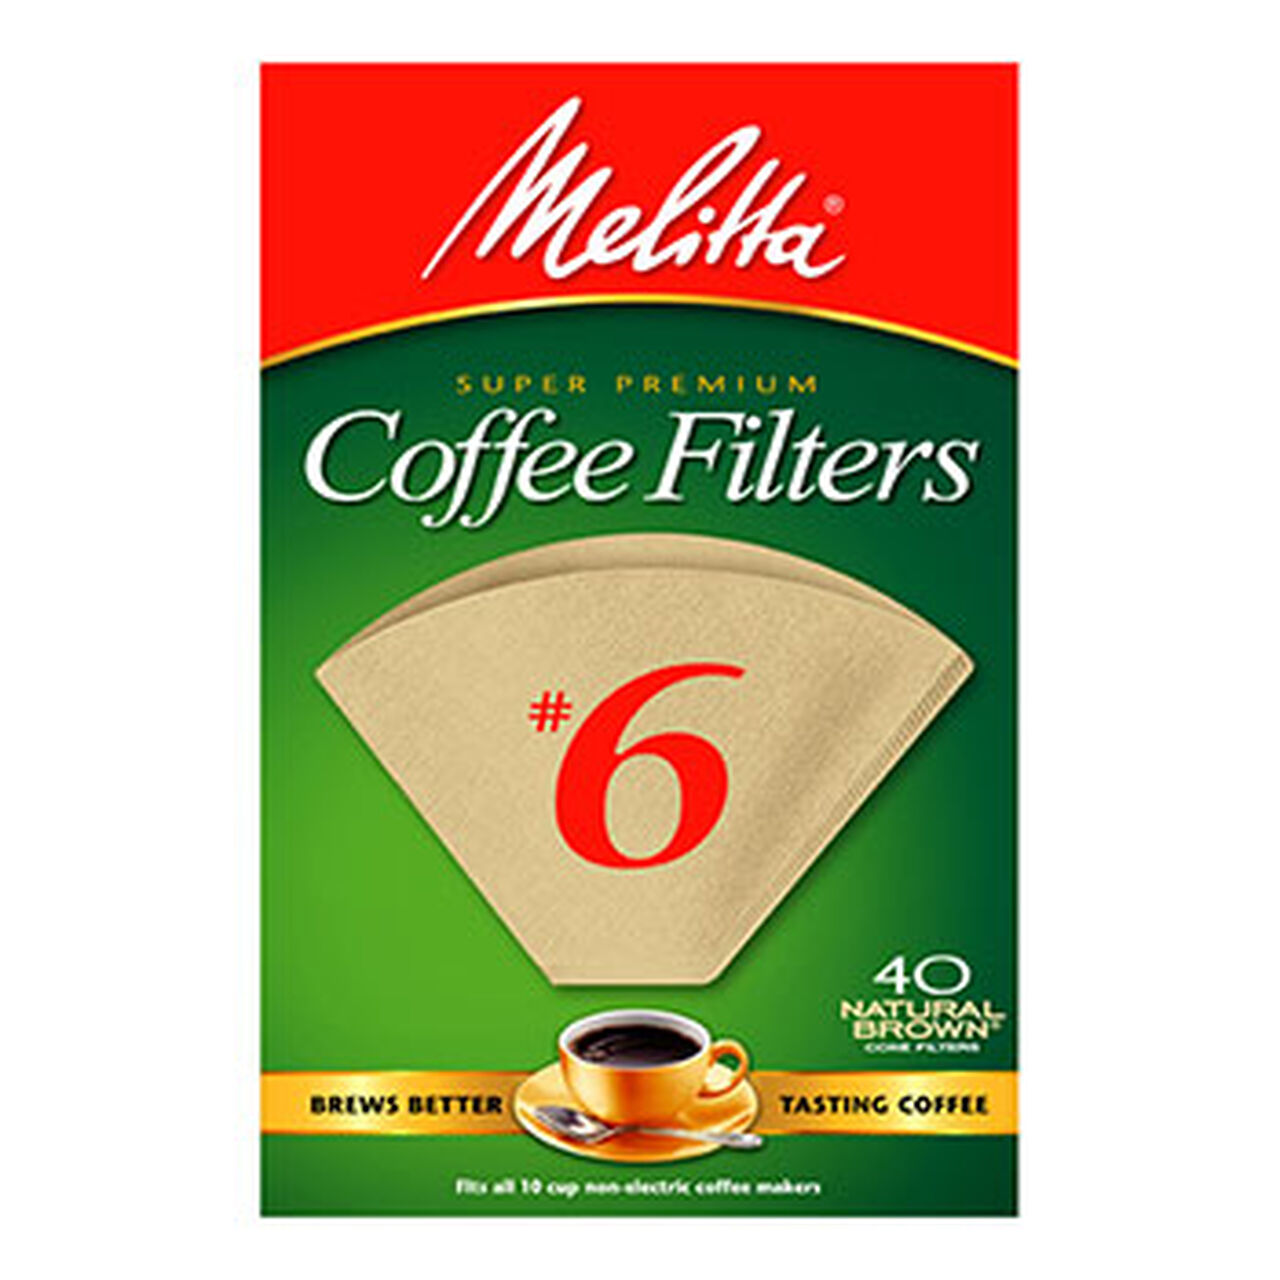 Melitta #6 Coffee Filters - (40ct.), , large image number 0